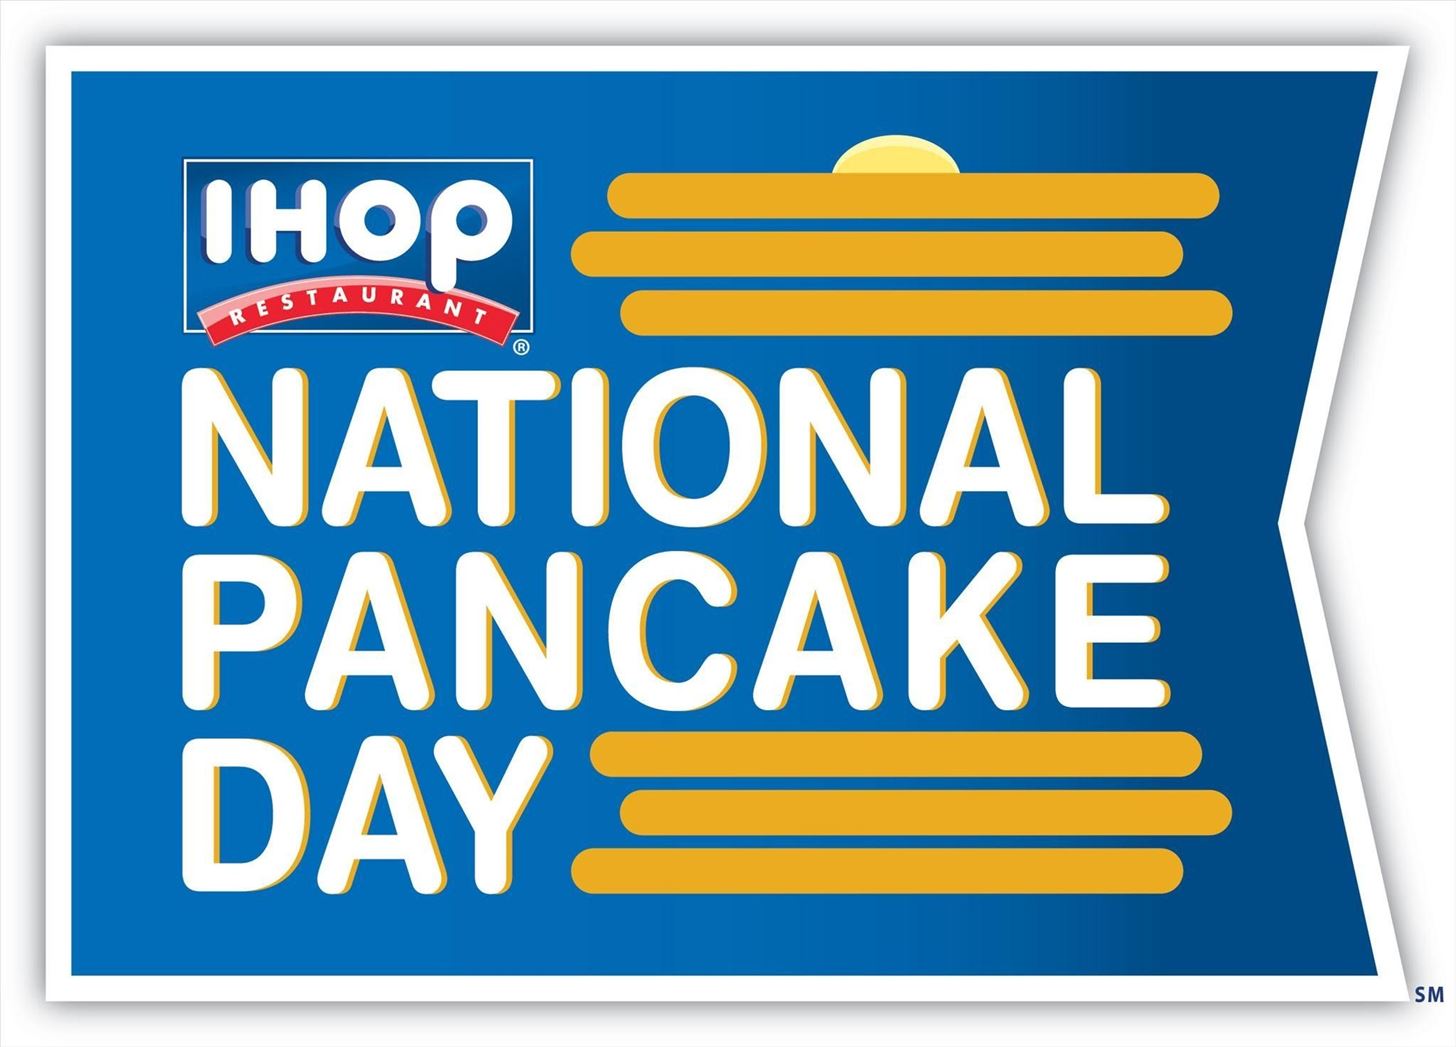 How to Get Free Buttermilk Pancakes at IHOP for National Pancake Day